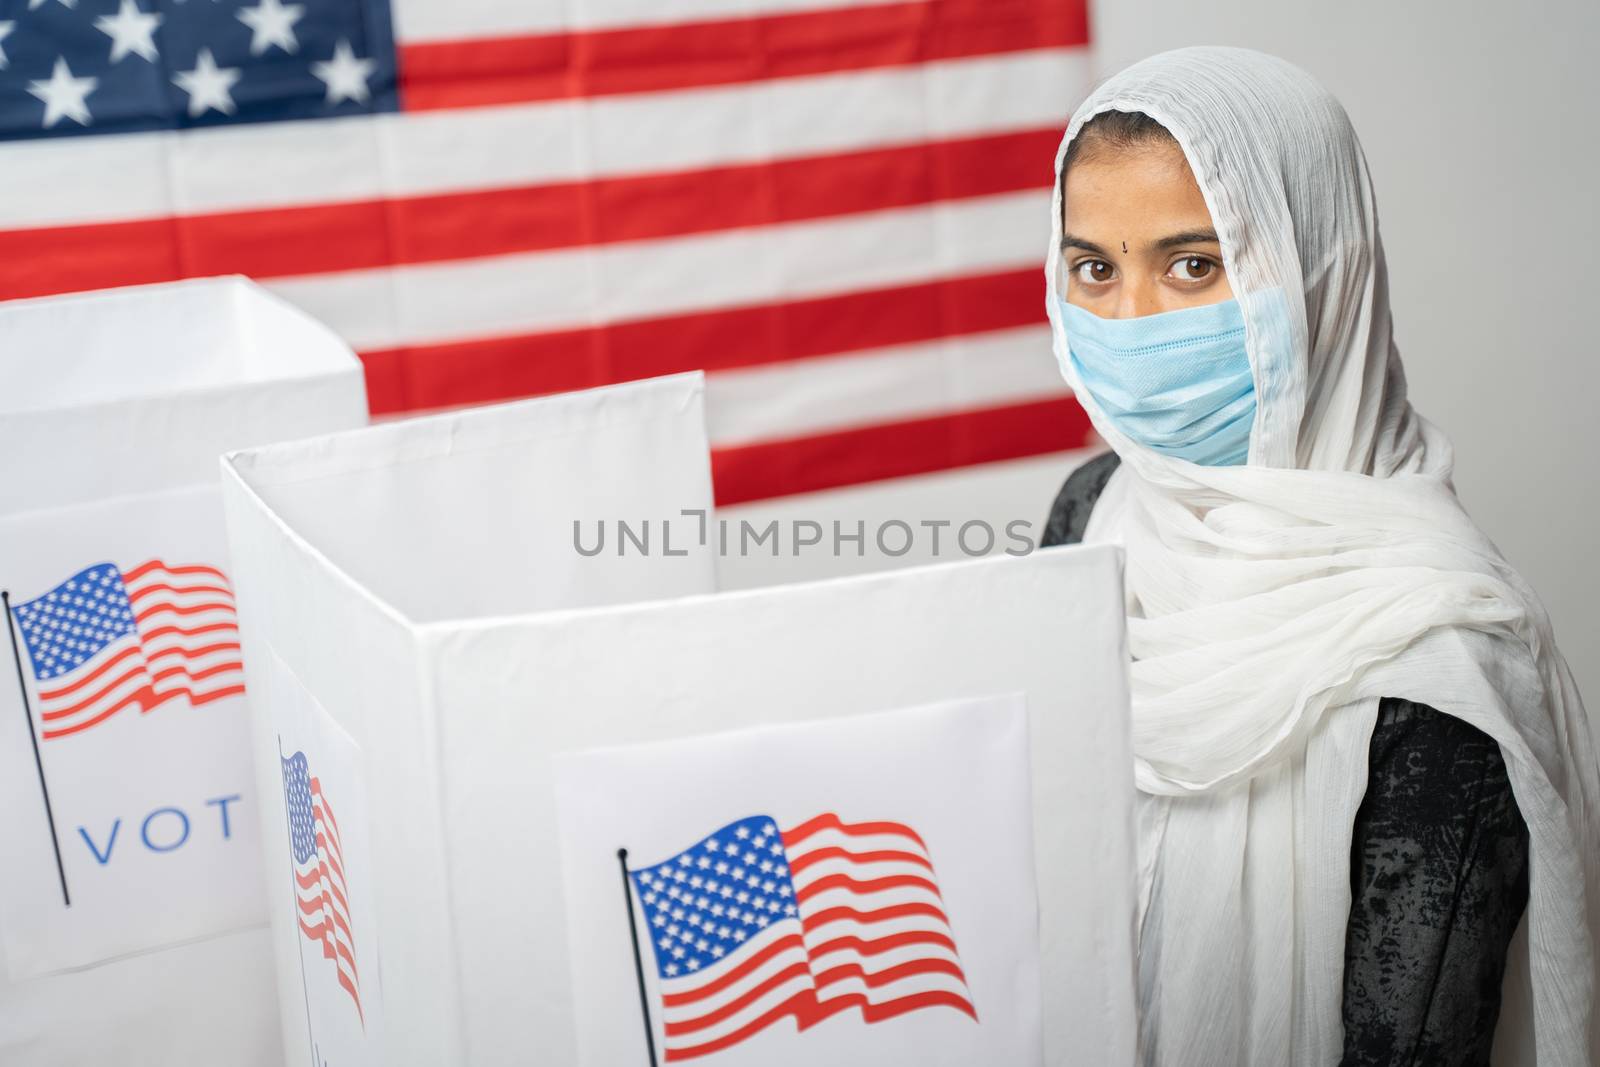 Girl with Hijab or head covering and mask worn at polling booth looking at camera with US flag as background - Concept of US election. by lakshmiprasad.maski@gmai.com